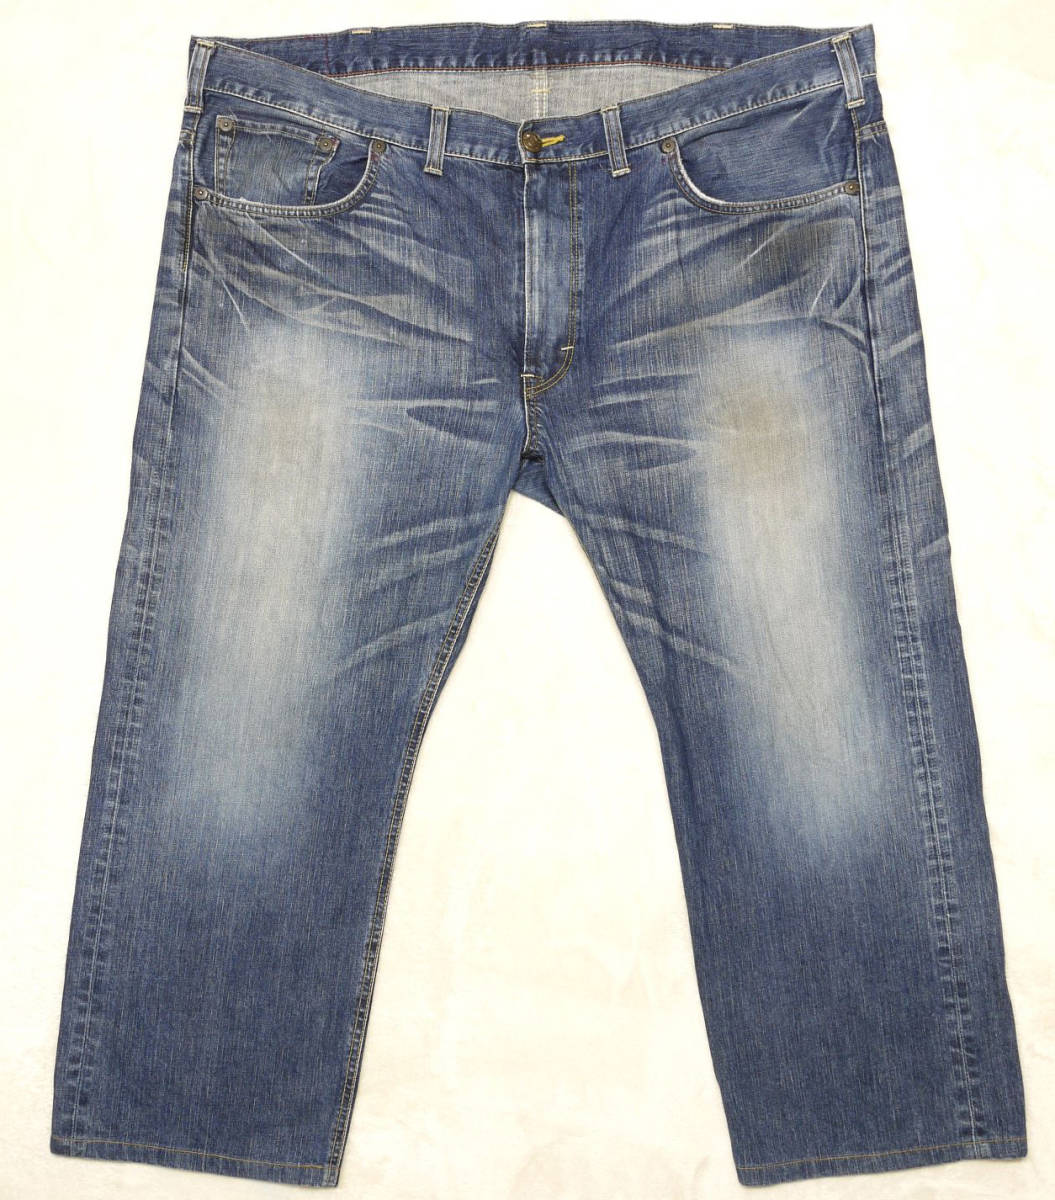 * considerably rare very large size W48 Edwin 504 men's jeans Denim pants absolute size W128 centimeter L68.5 centimeter made in Japan 